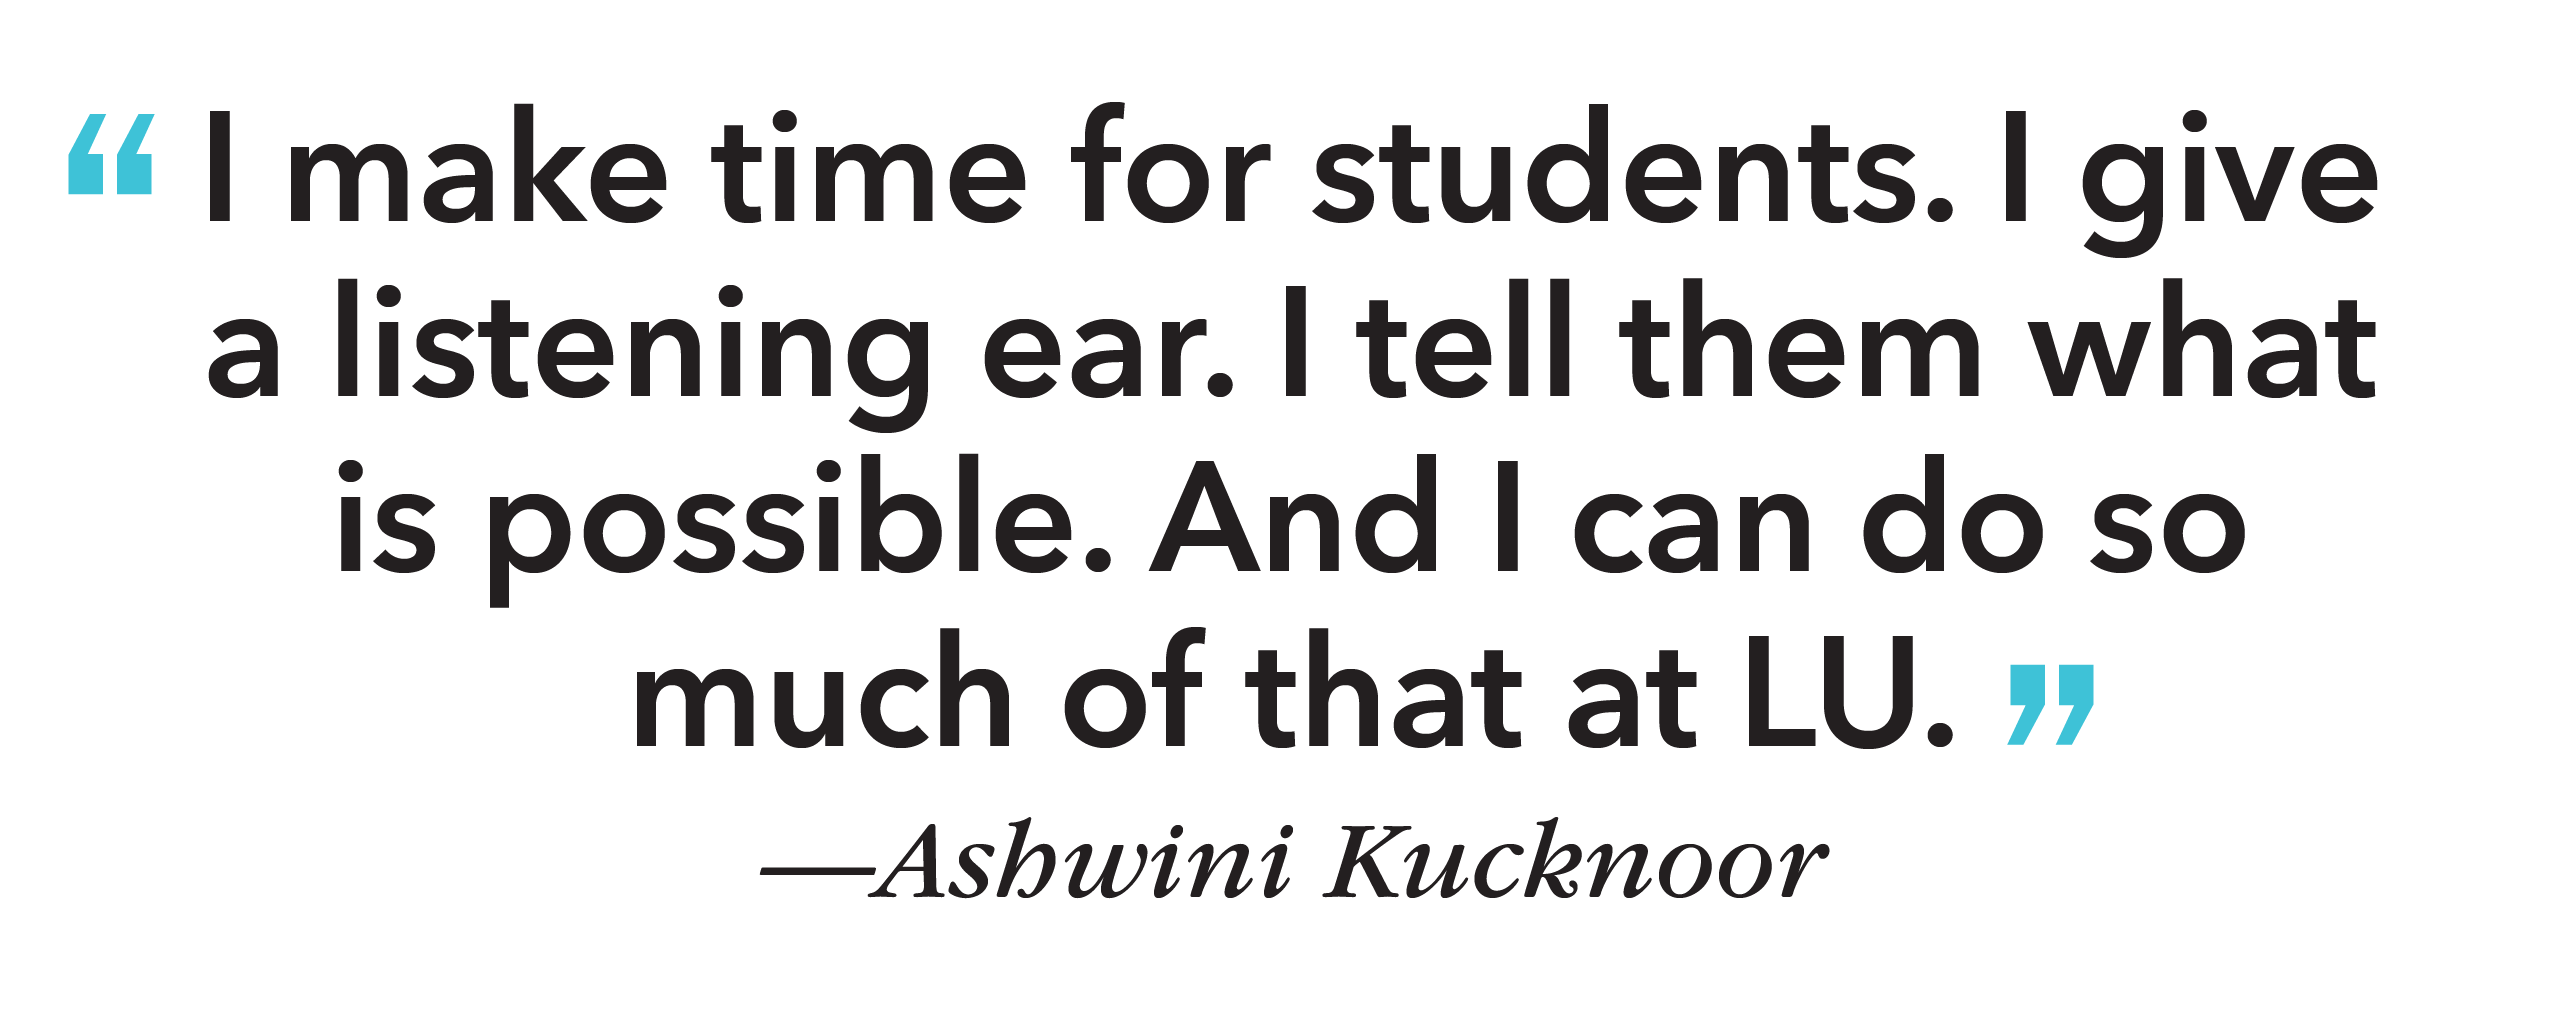 quote: I make time for students. I give a listening ear. I tell them what is possible. And I can do so much of that at LU.